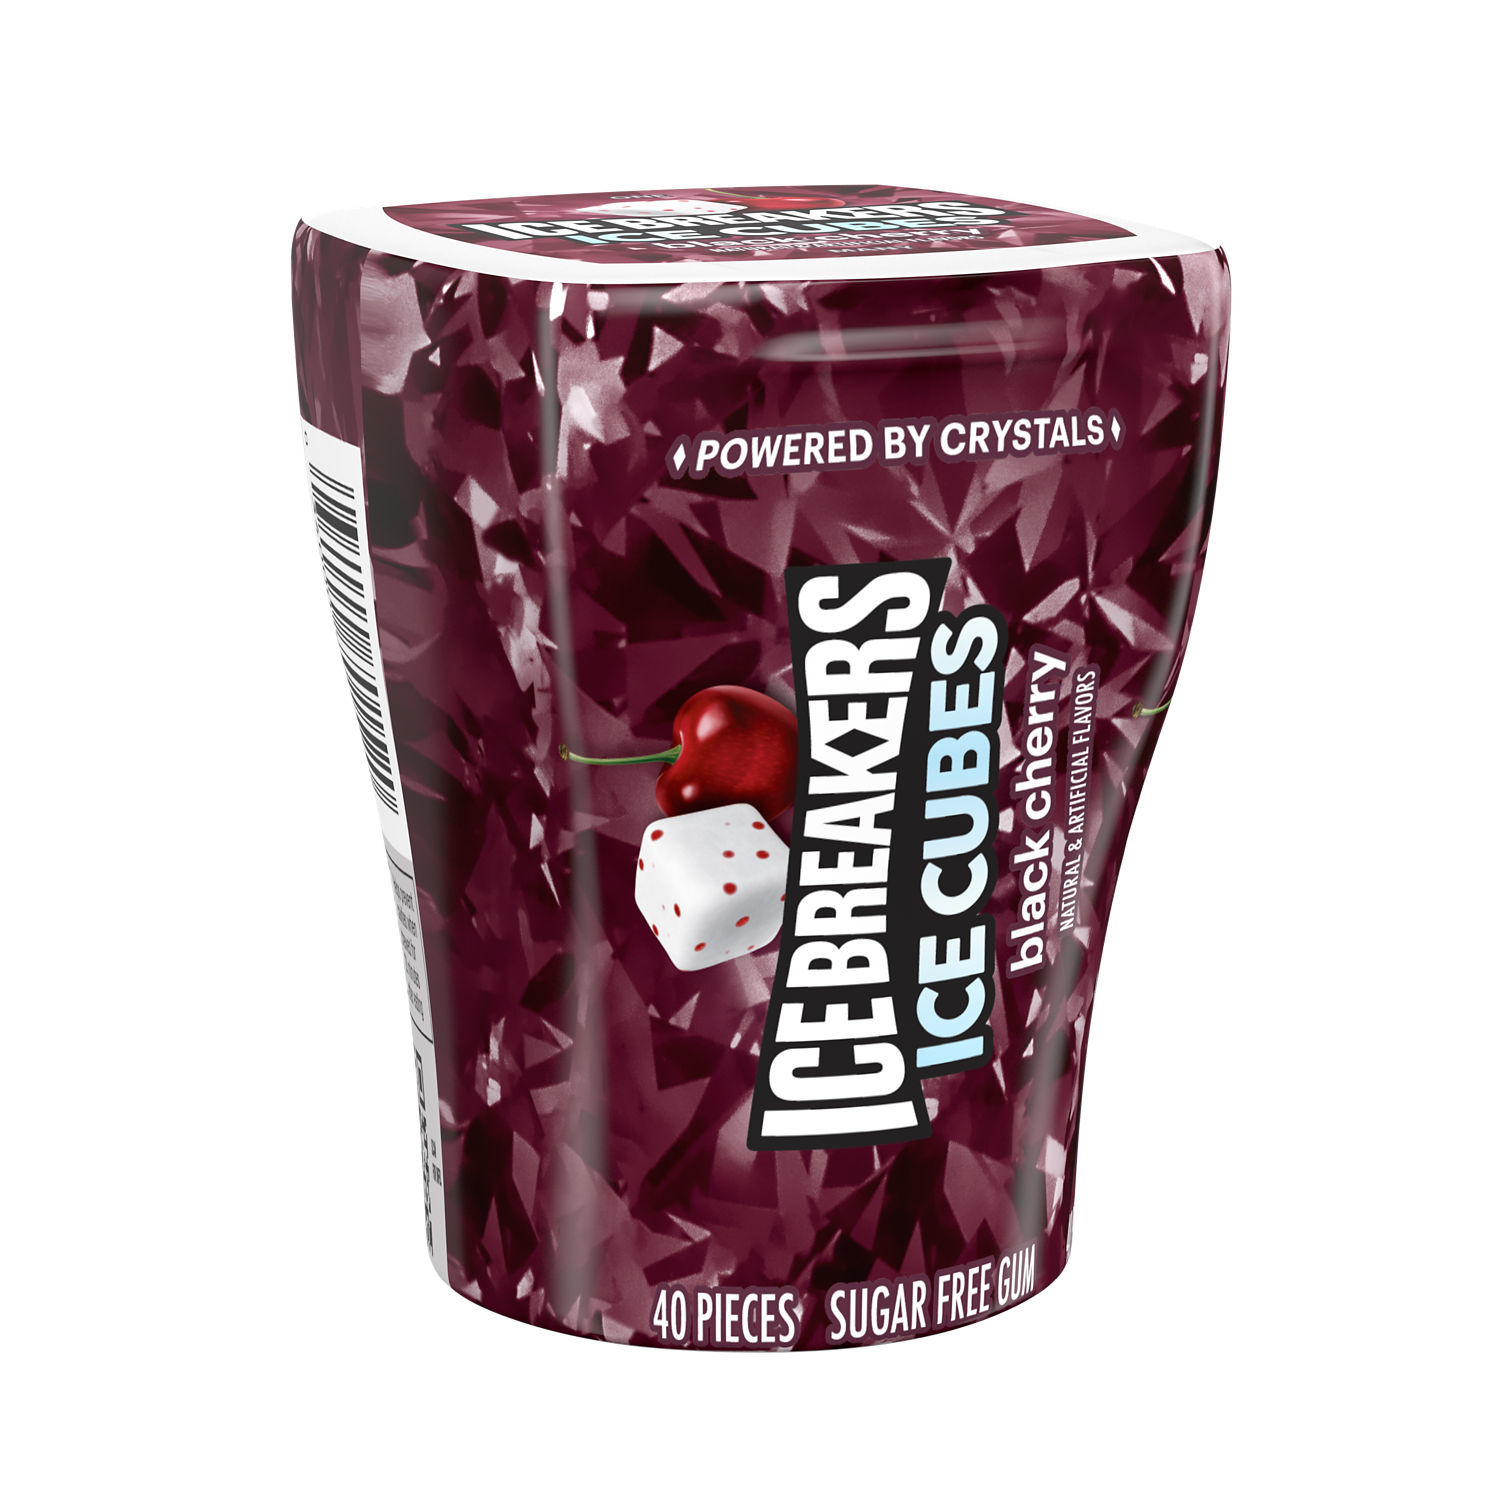 Ice Breakers Ice Cubes Black Cherry Sugar Free Chewing Gum, Bottle 3.24 oz, 40 Pieces - image 1 of 4